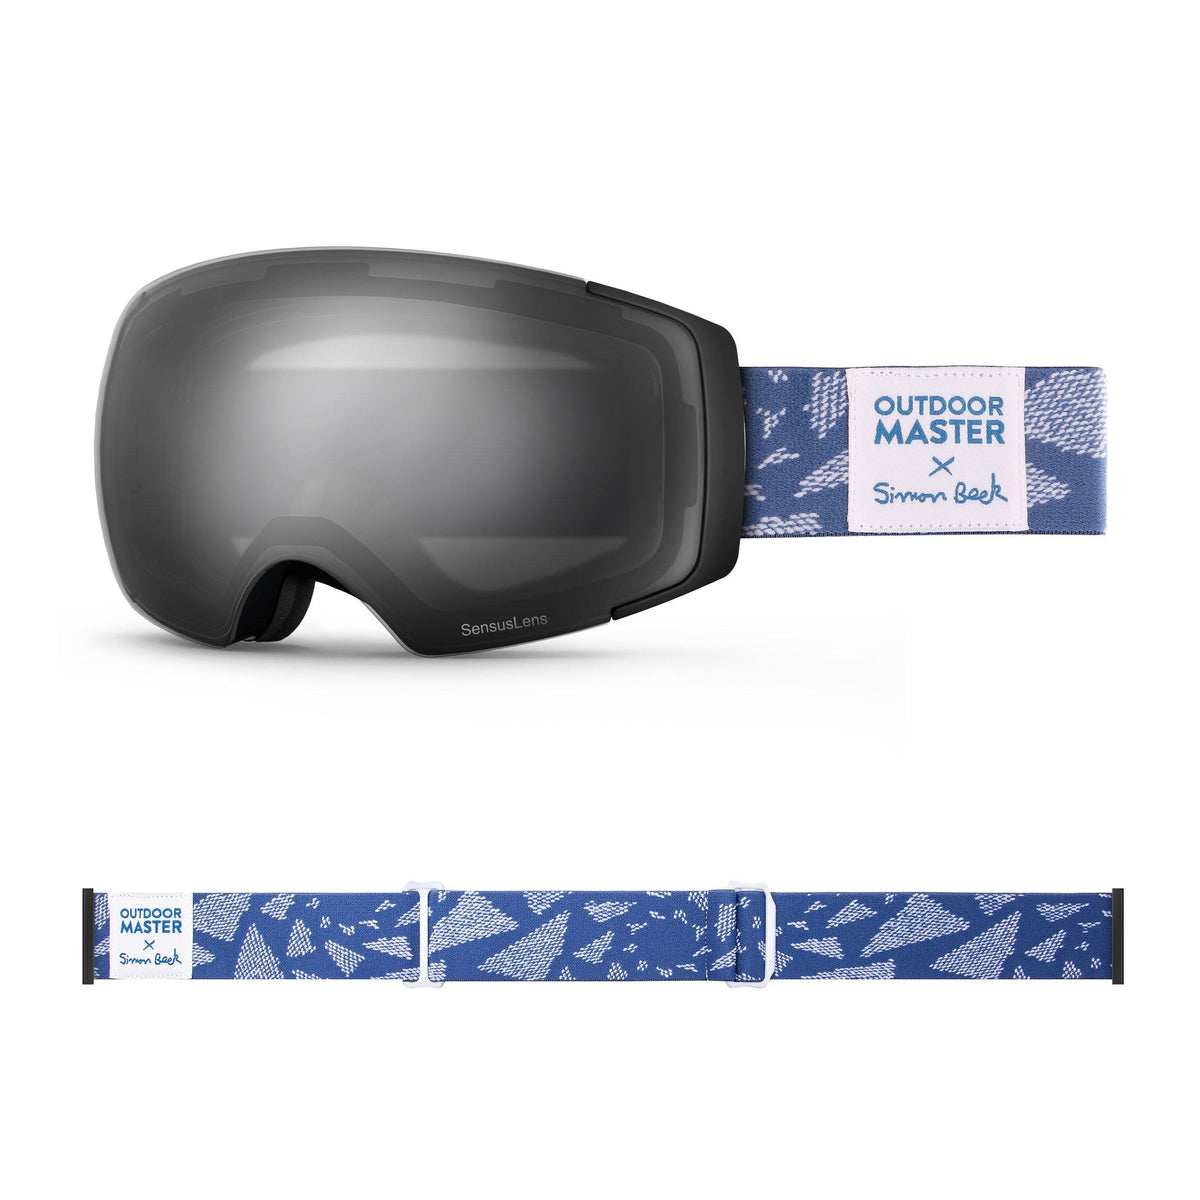 OutdoorMaster x Simon Beck Ski Goggles Pro Series - Snowshoeing Art Limited Edition OutdoorMaster SensusLens VLT 13-60% From Light to Dark Grey Flying Triangles